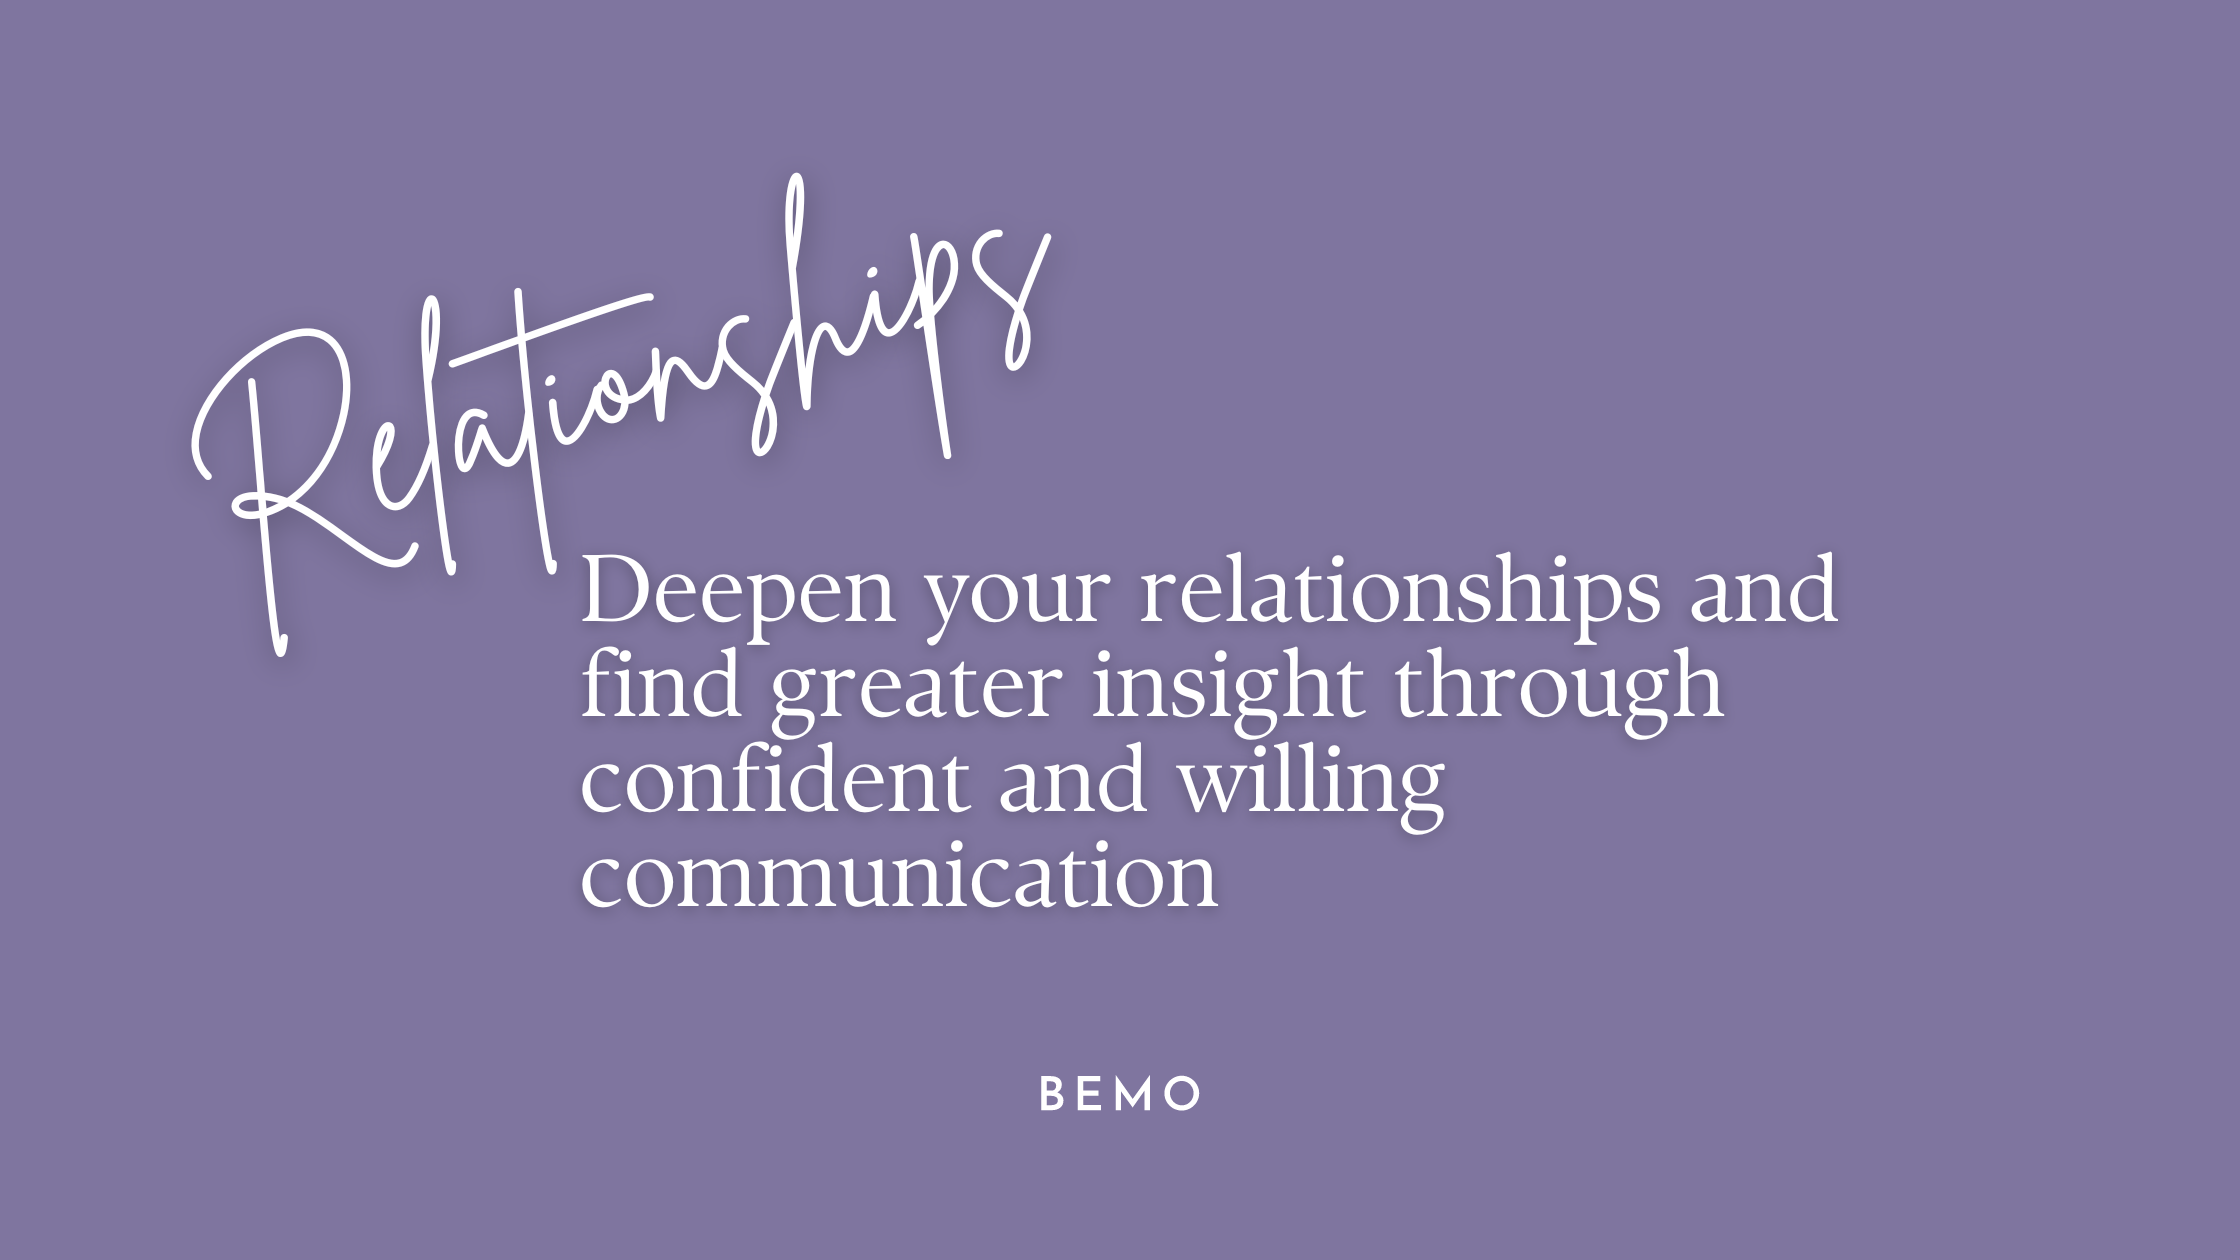 How To Deepen Your Relationships Using The BeMo Practice